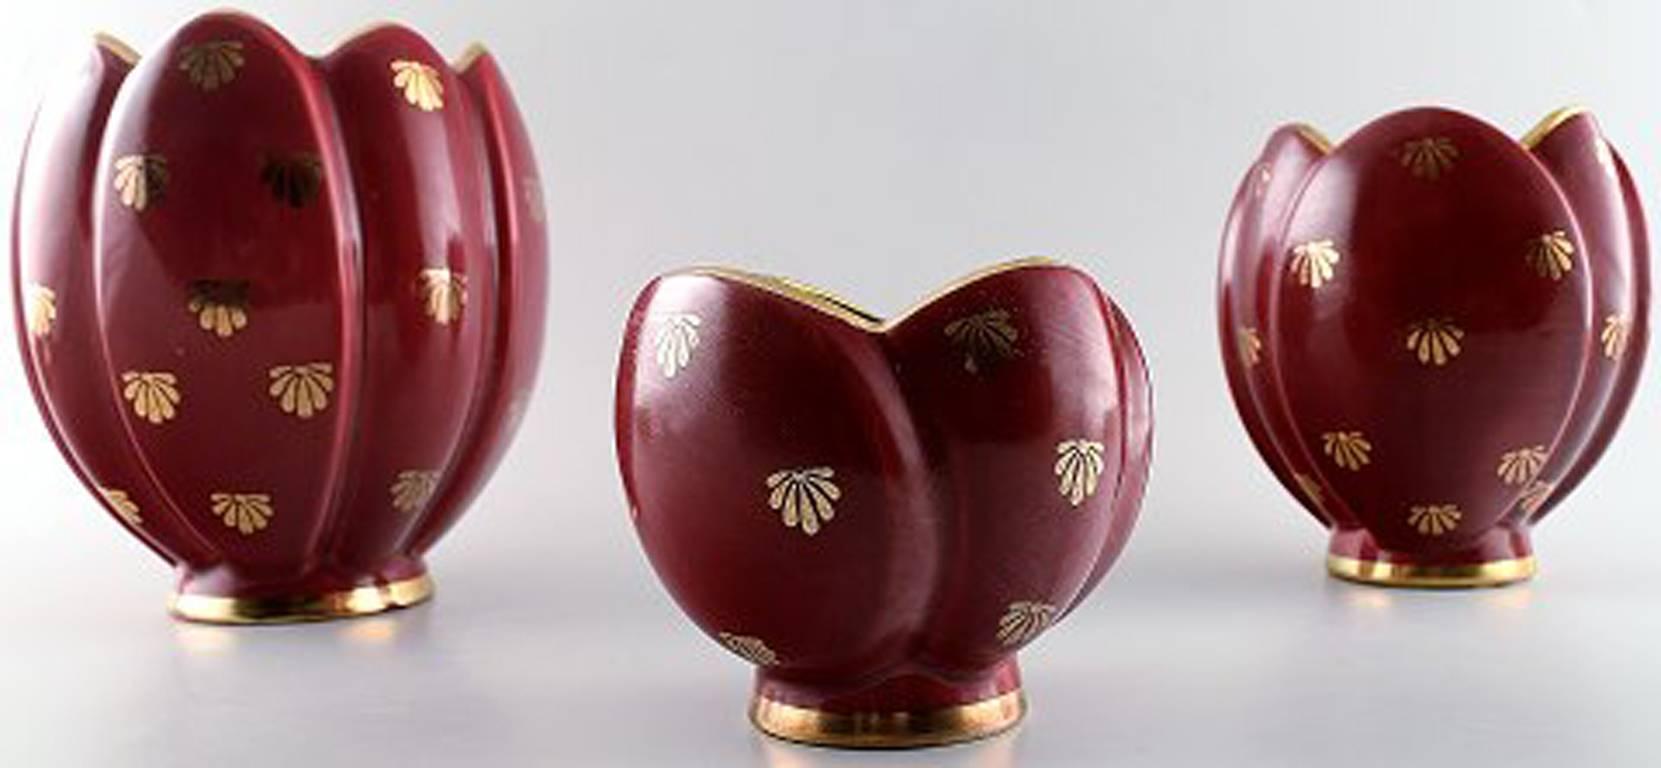 Collection of 'Red Rubin' ceramics with red glaze, gilded, Upsala-Ekeby, Gefle. Design Arthur Percy.

Consisting of three vases and four lidded vases.

The largest vase measures 14 x 17 cm.

In perfect condition.